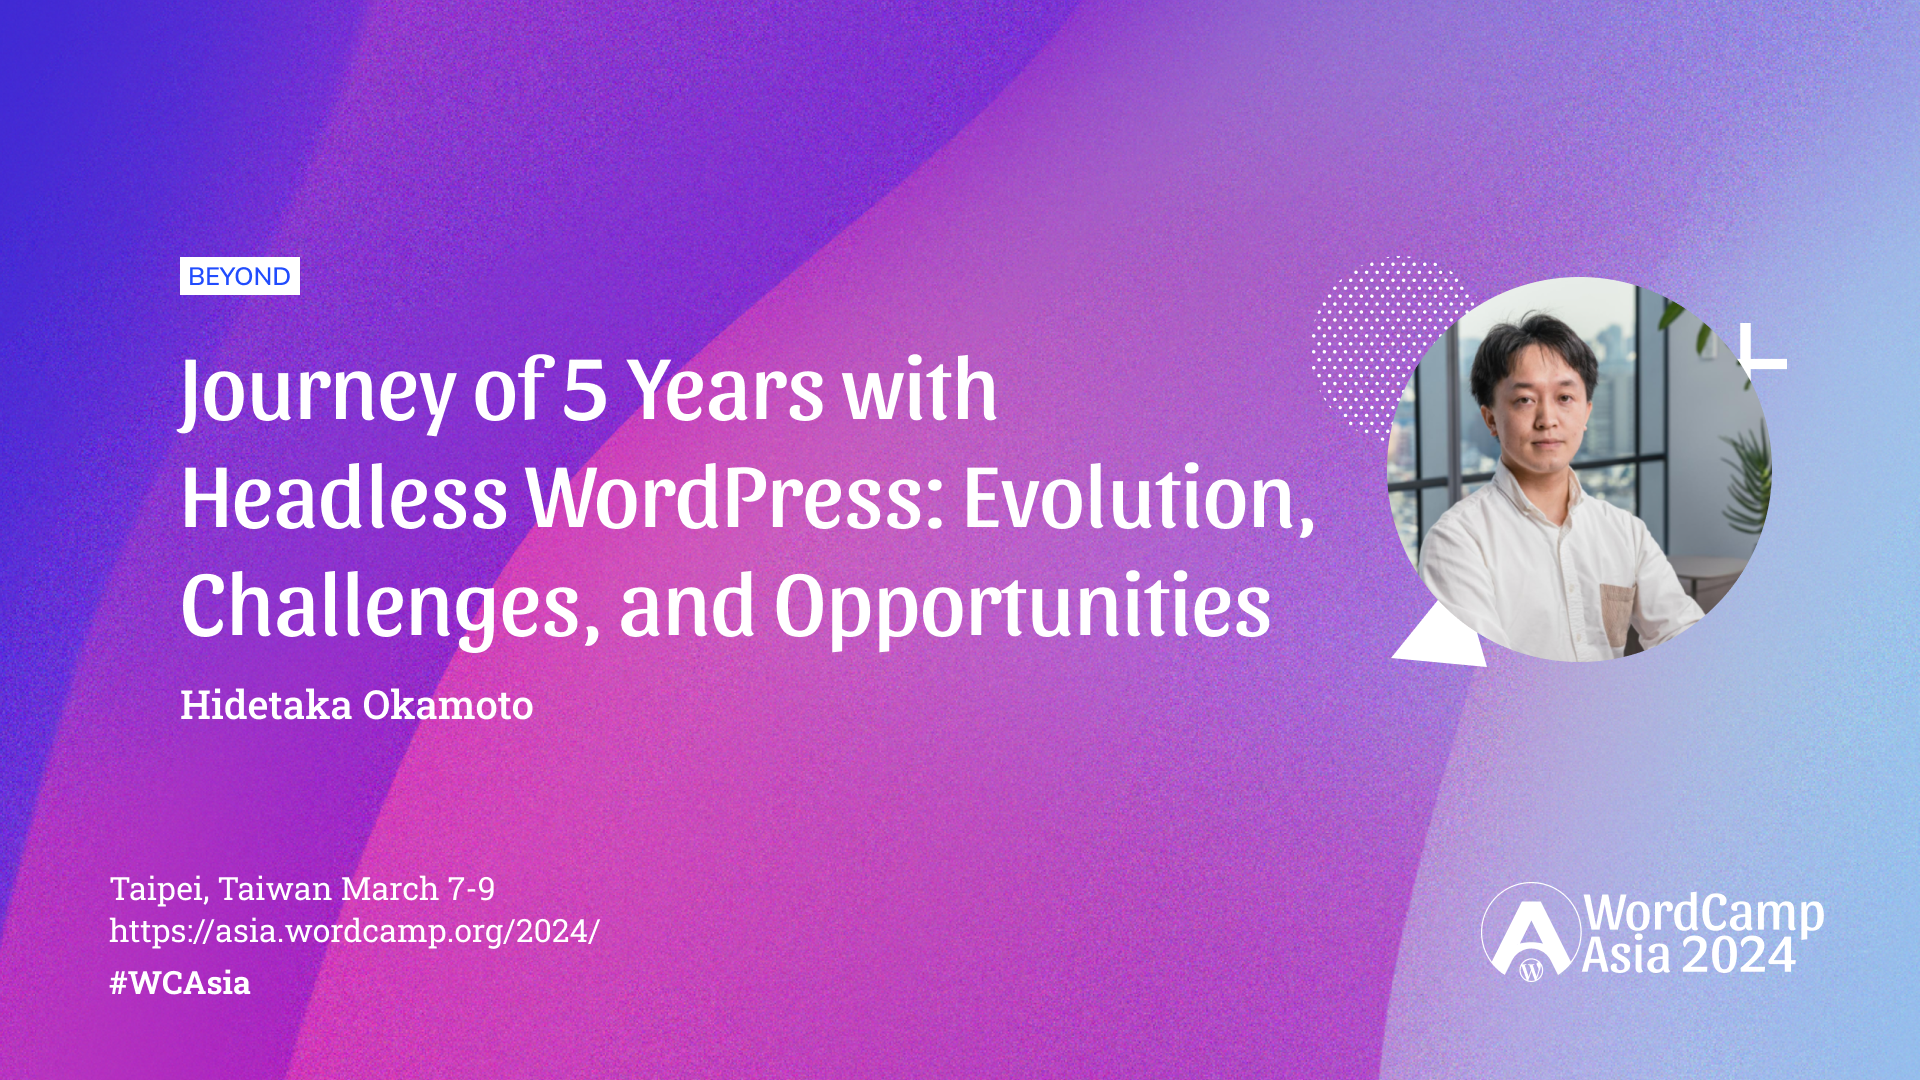 Journey of 5 Years with Headless WordPress: Evolution, Challenges, and Opportunities